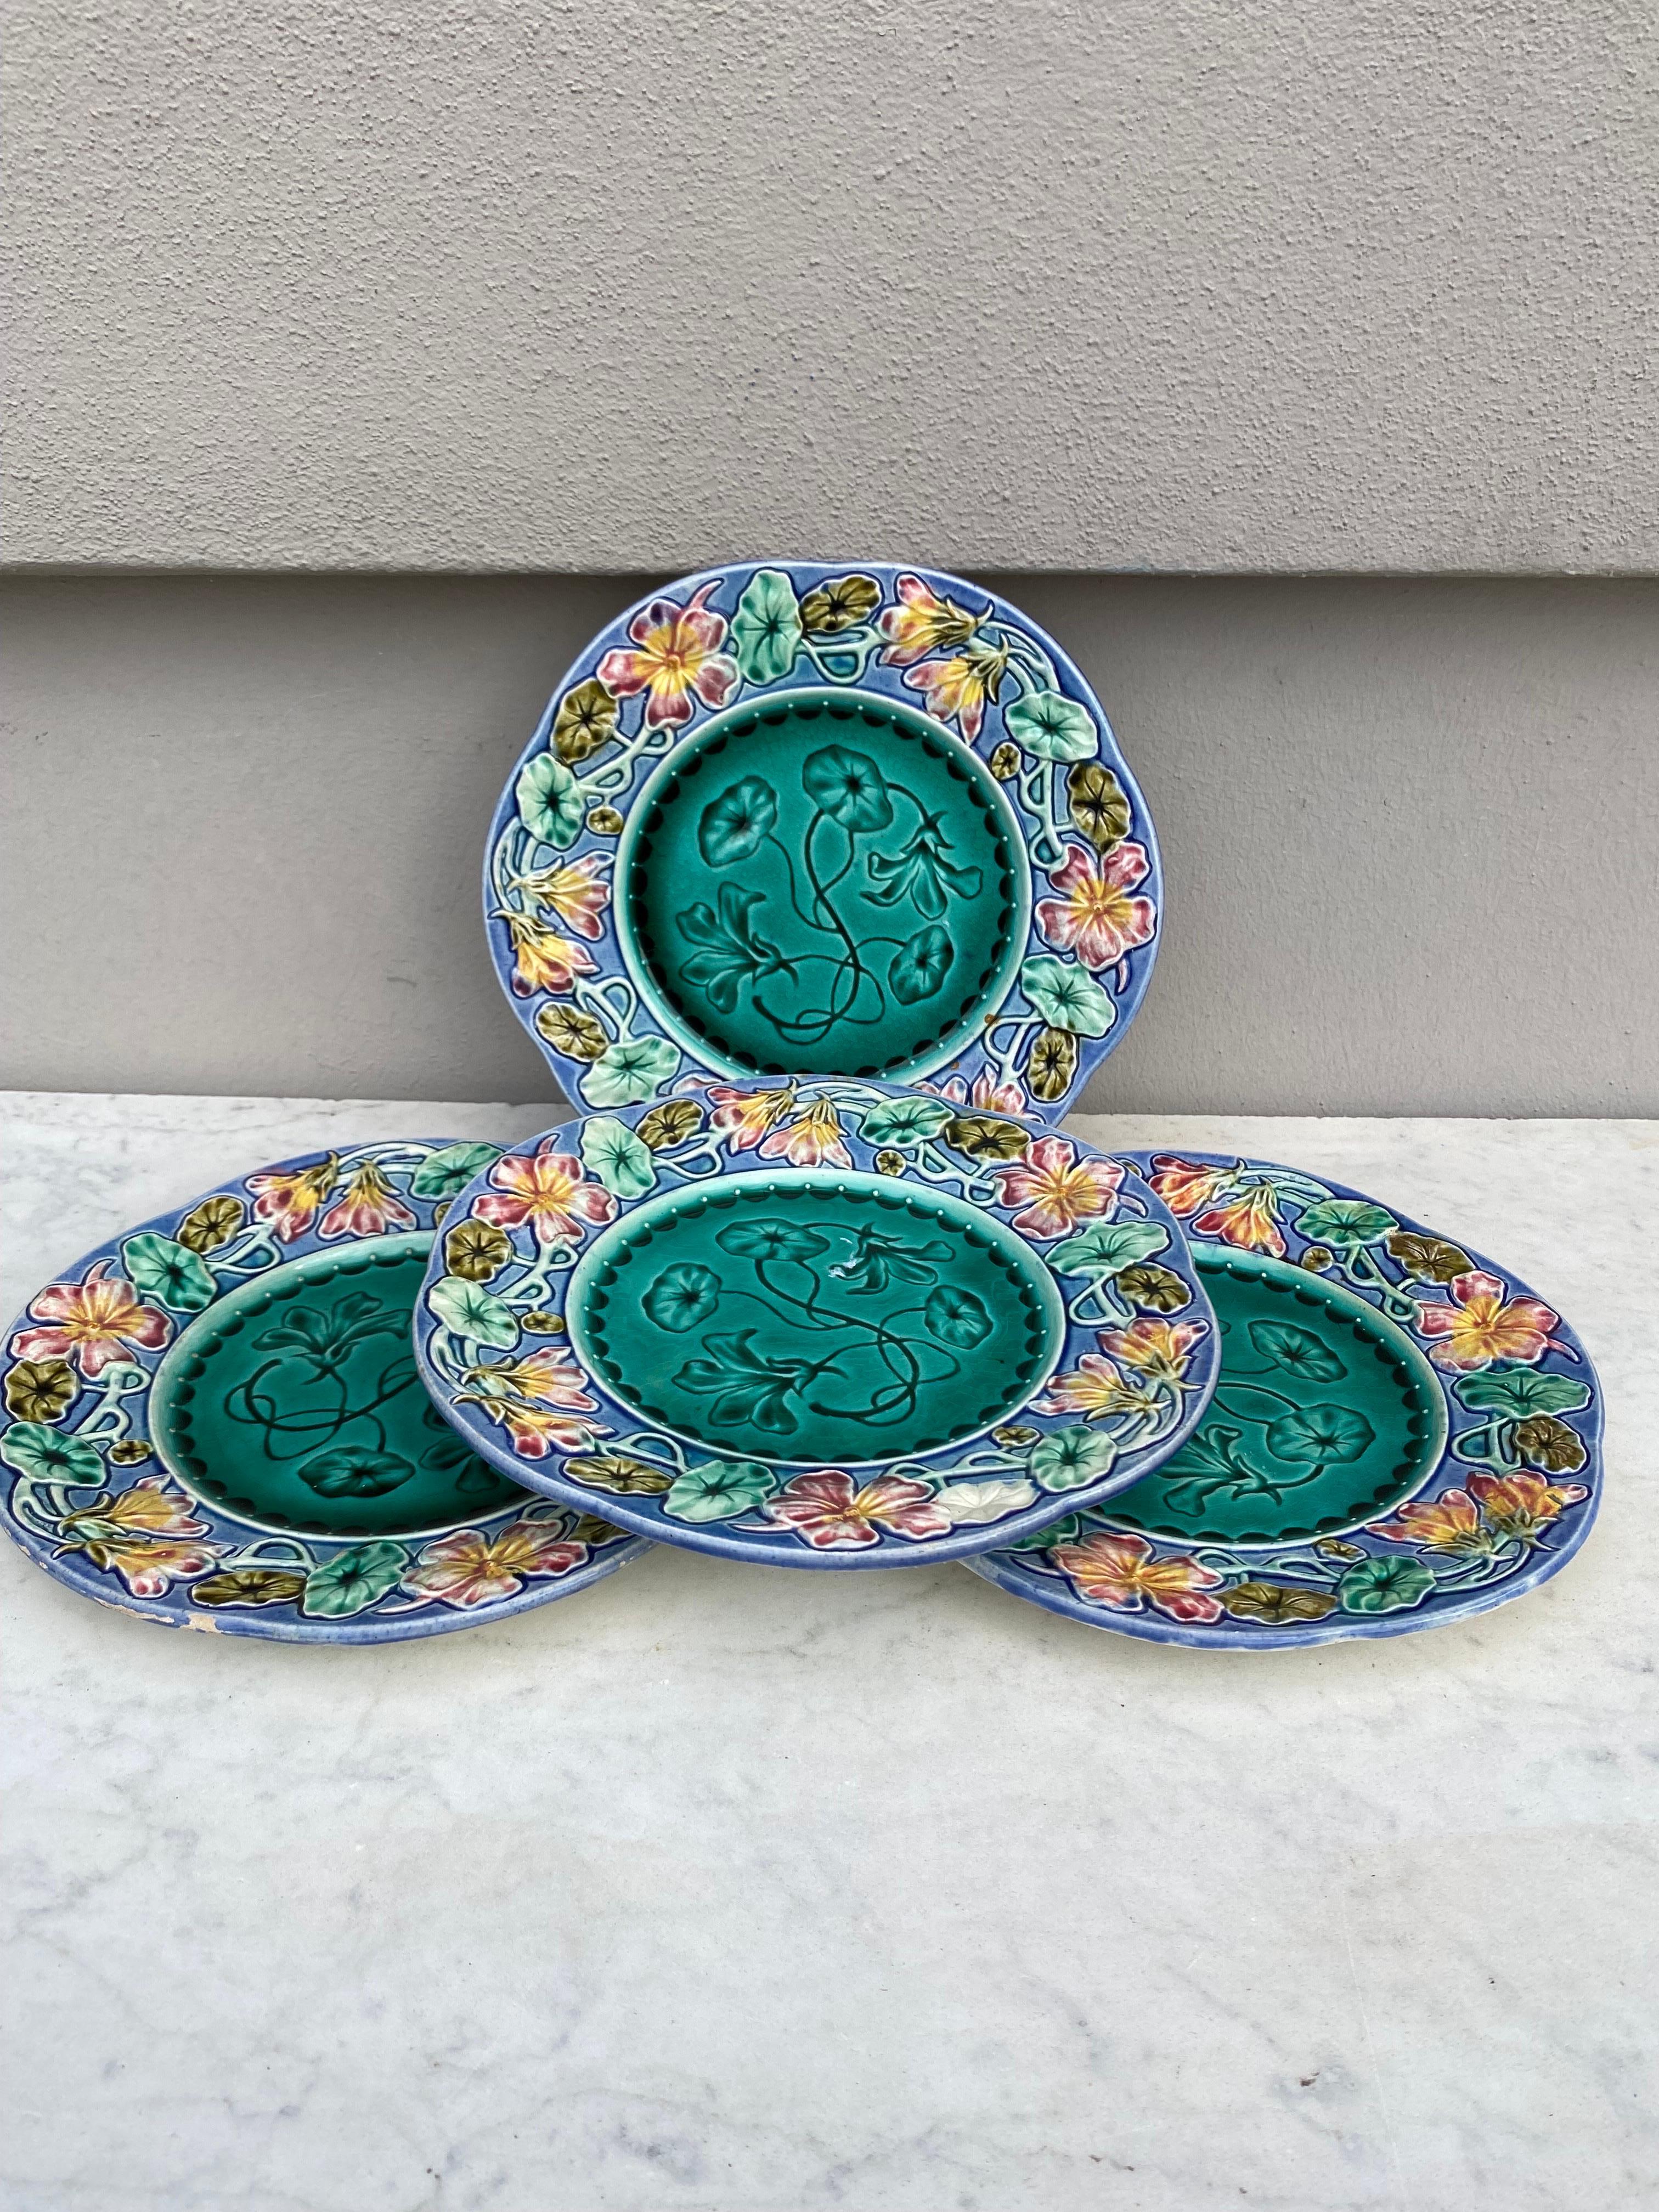 19th Century French Majolica flowers plate.